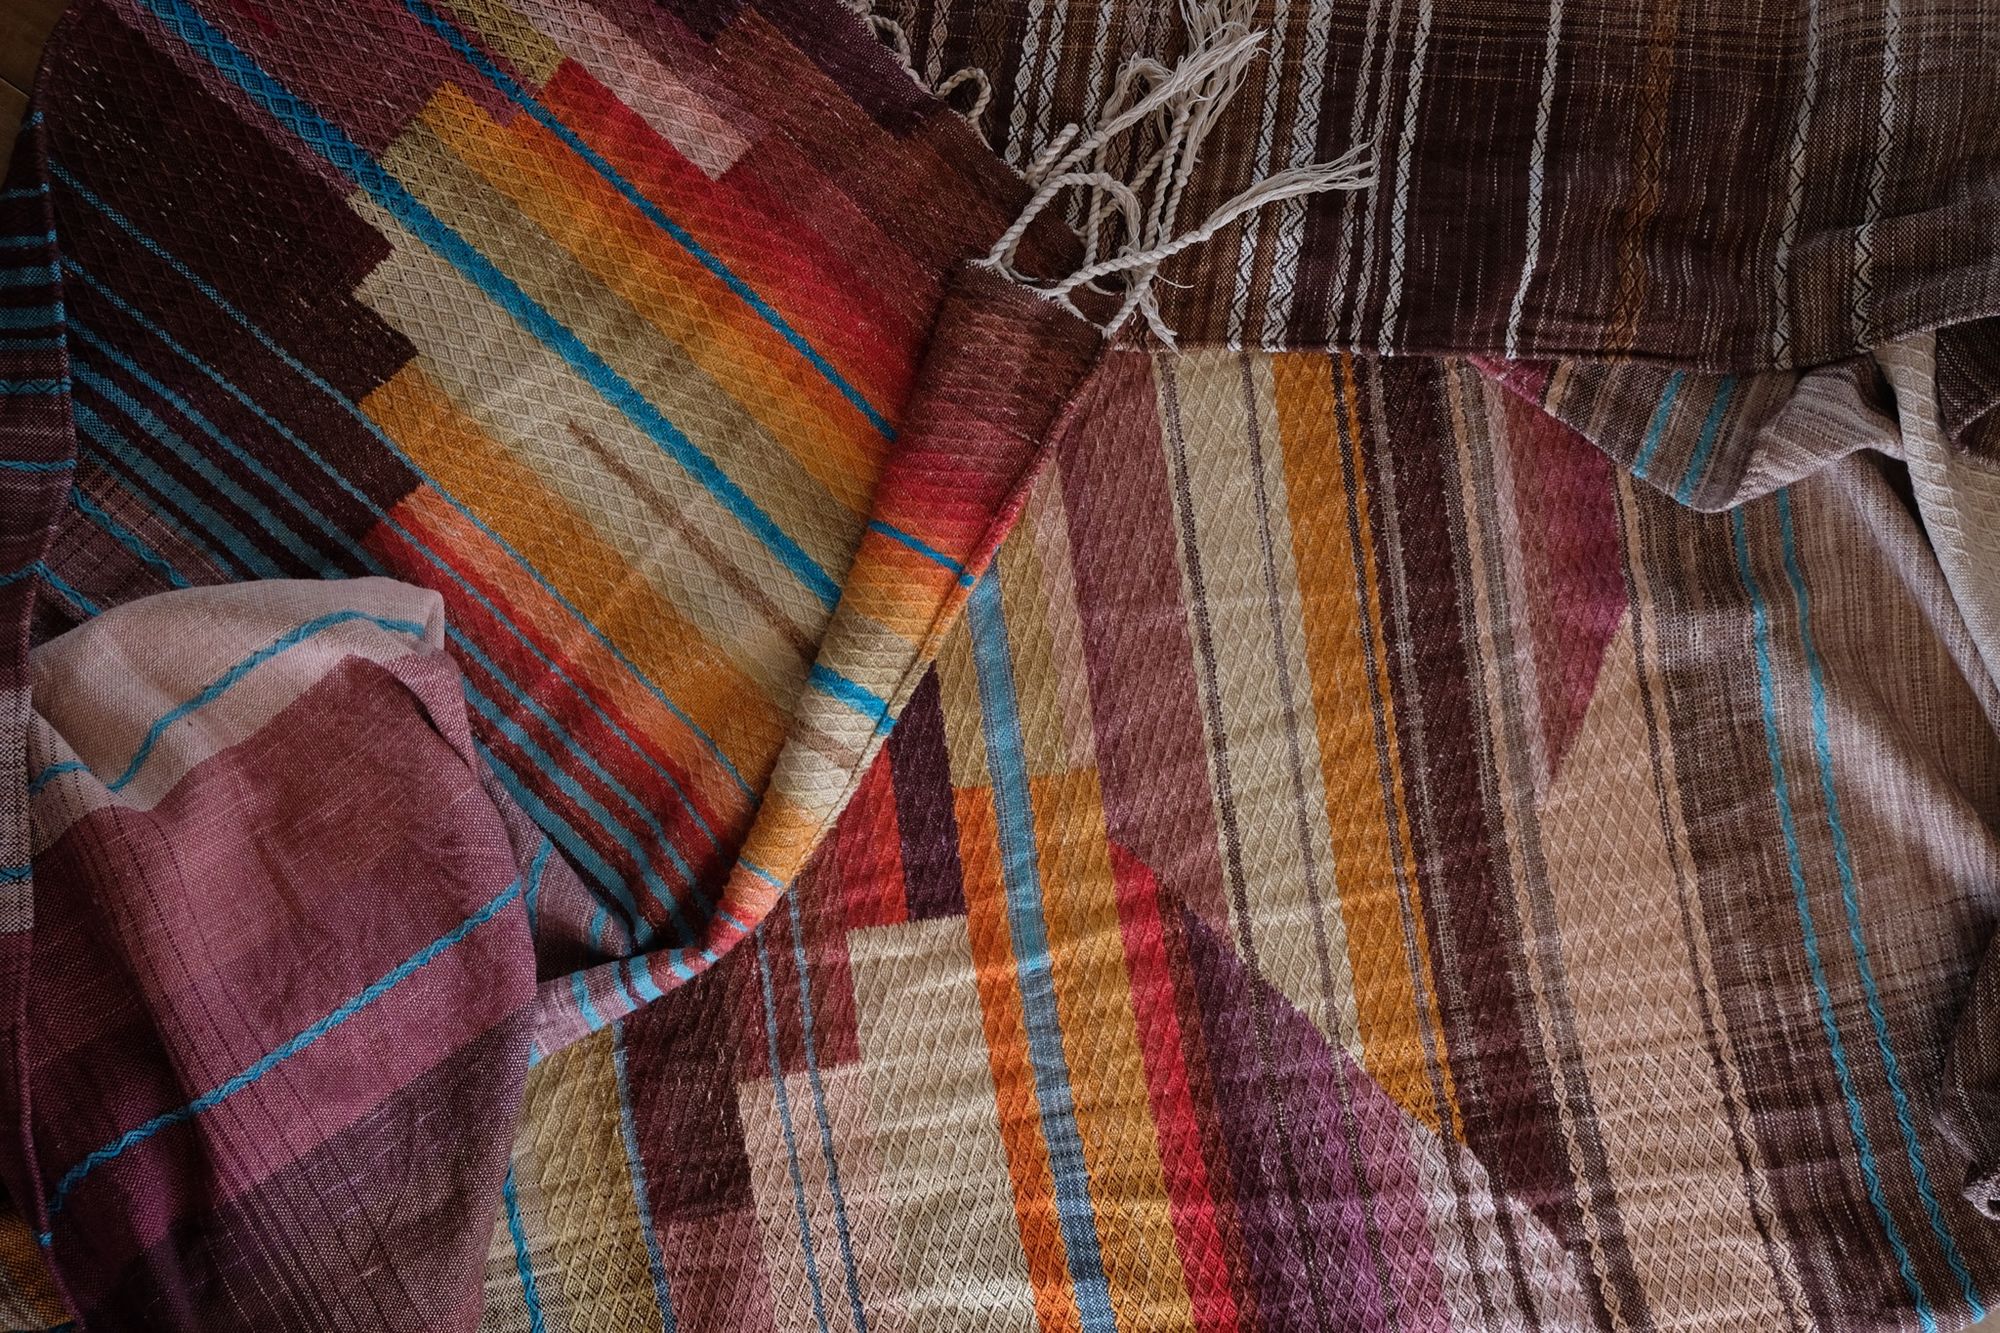 Handwoven fabric with a diamond texture pattern in natural browns, grey, purples, reds, turquoise, yellow, orange and pink.